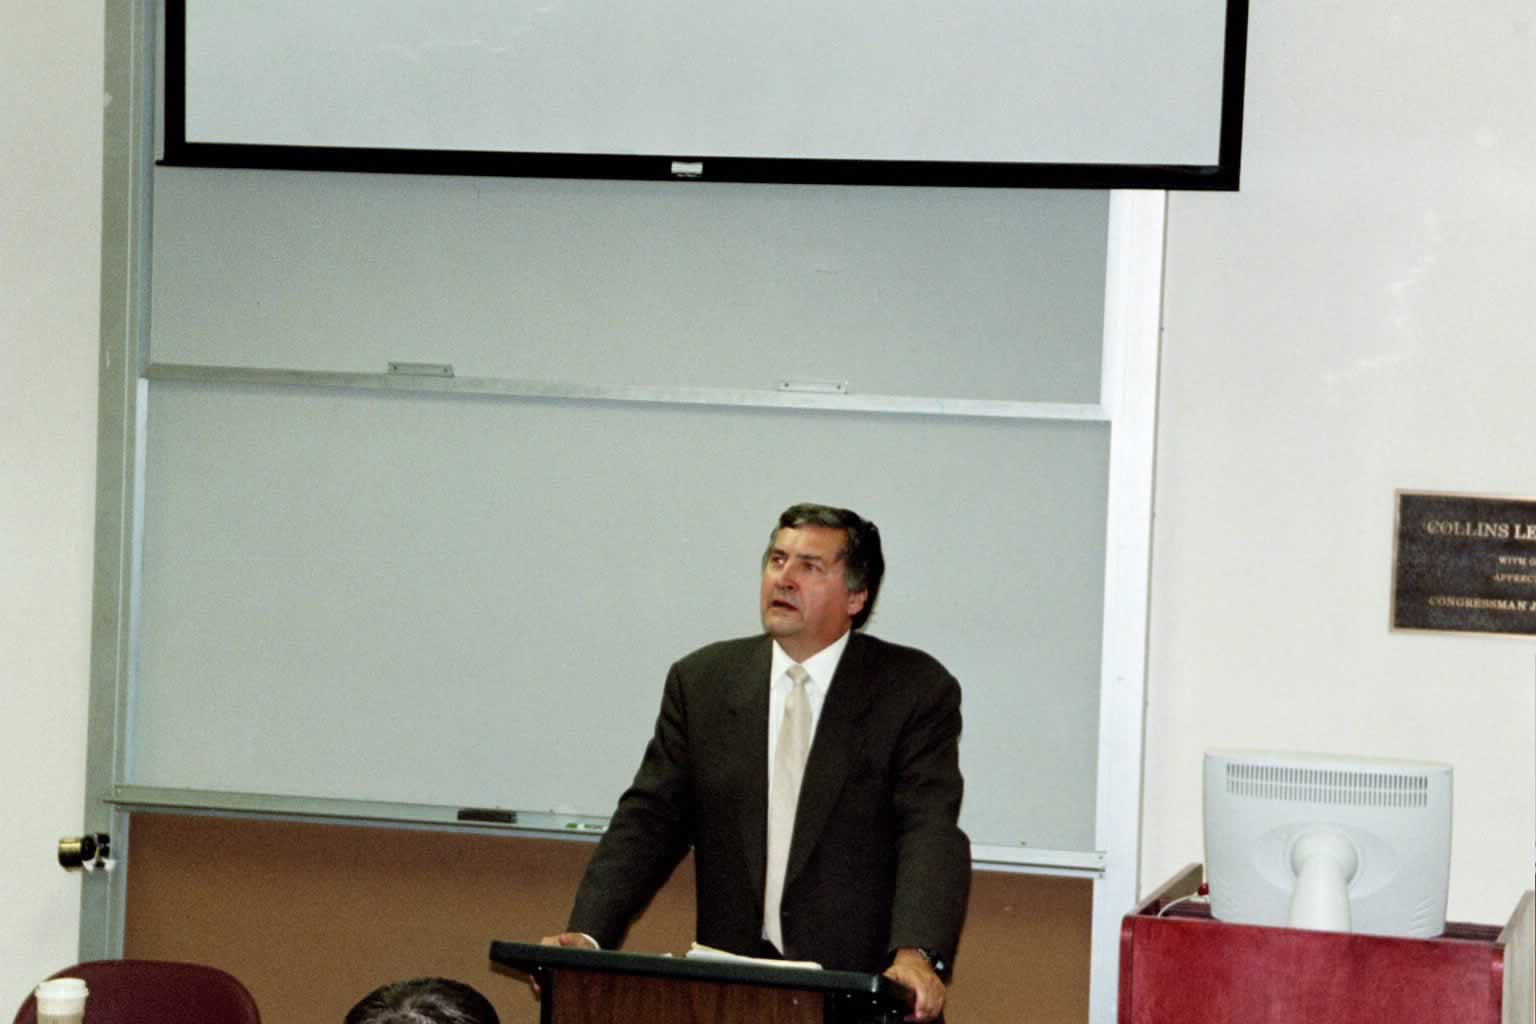 picture of Paul Marshall speaking behind a podium at the front of a class